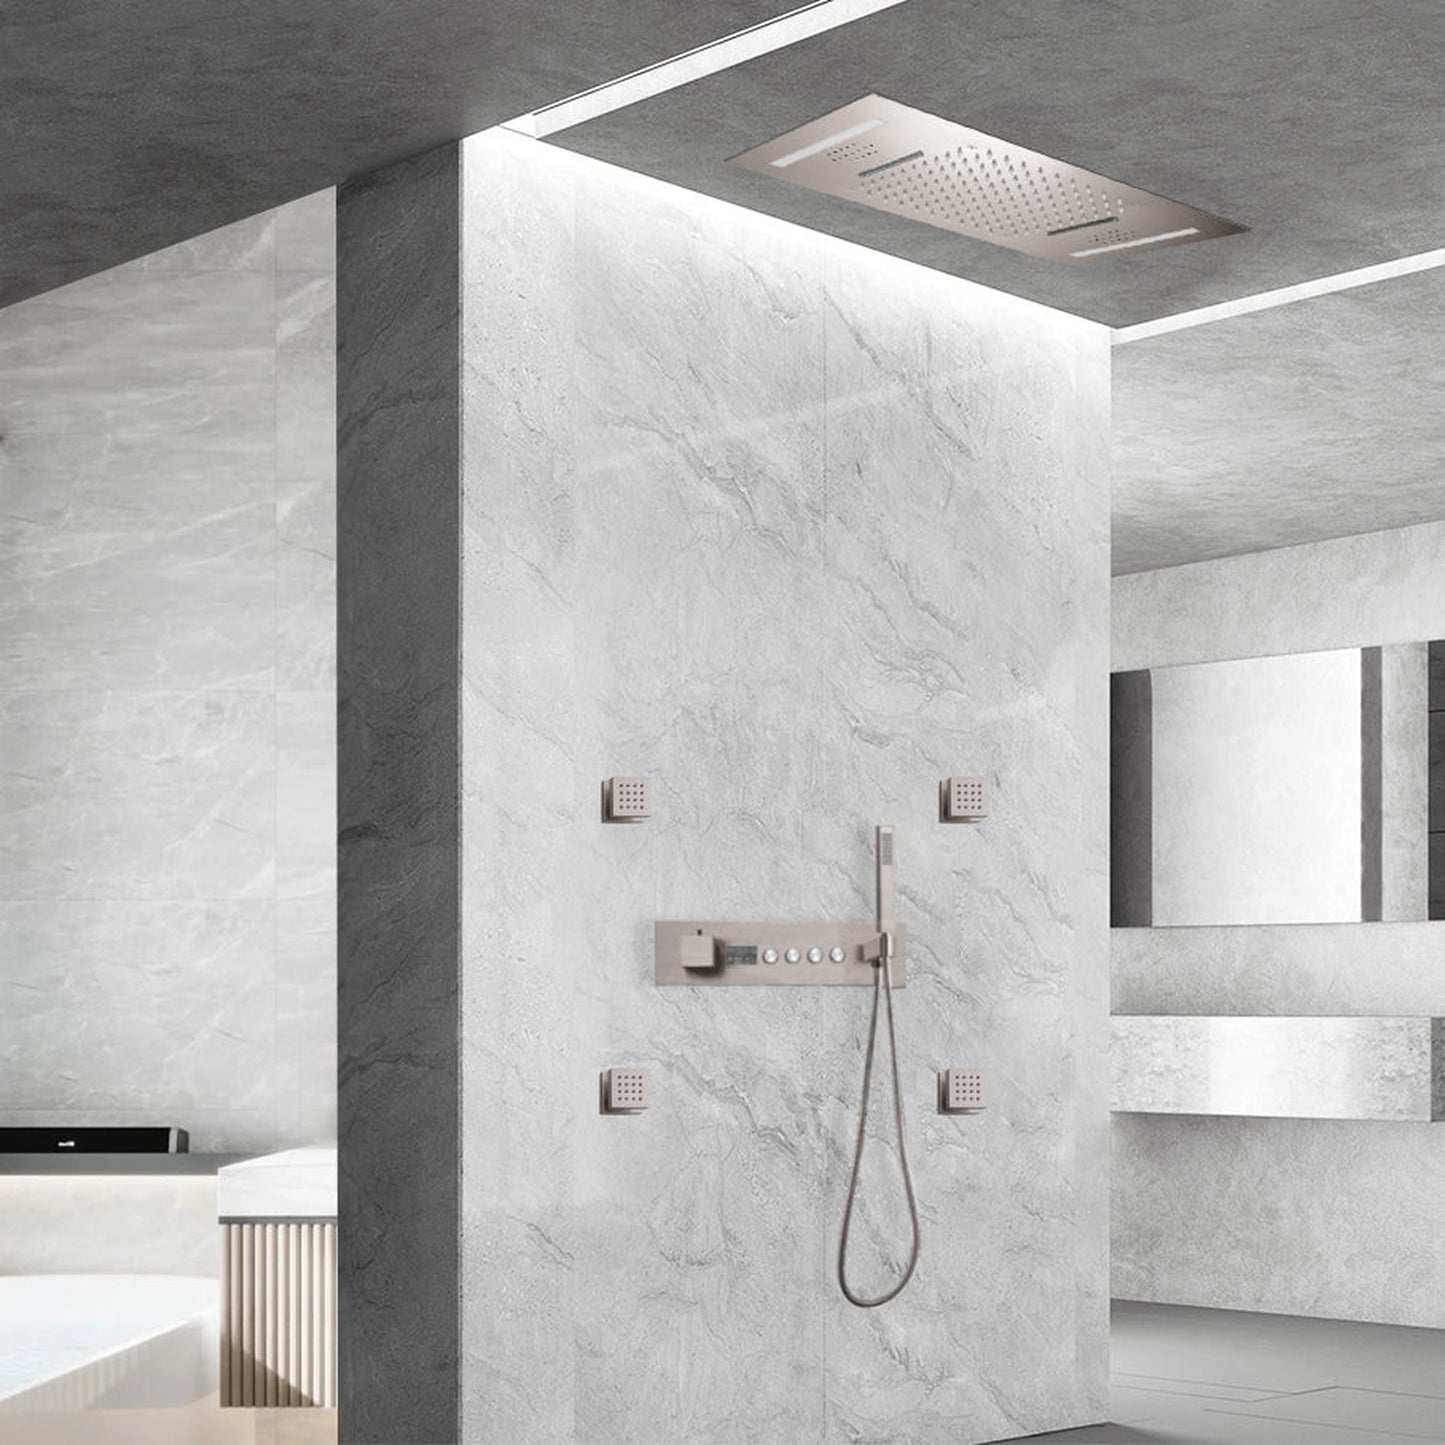 Fontana Parma Brushed Nickel Recessed Ceiling Mounted LED Thermostatic Rainfall Waterfall Shower System With 4-Body Jets and Hand Shower